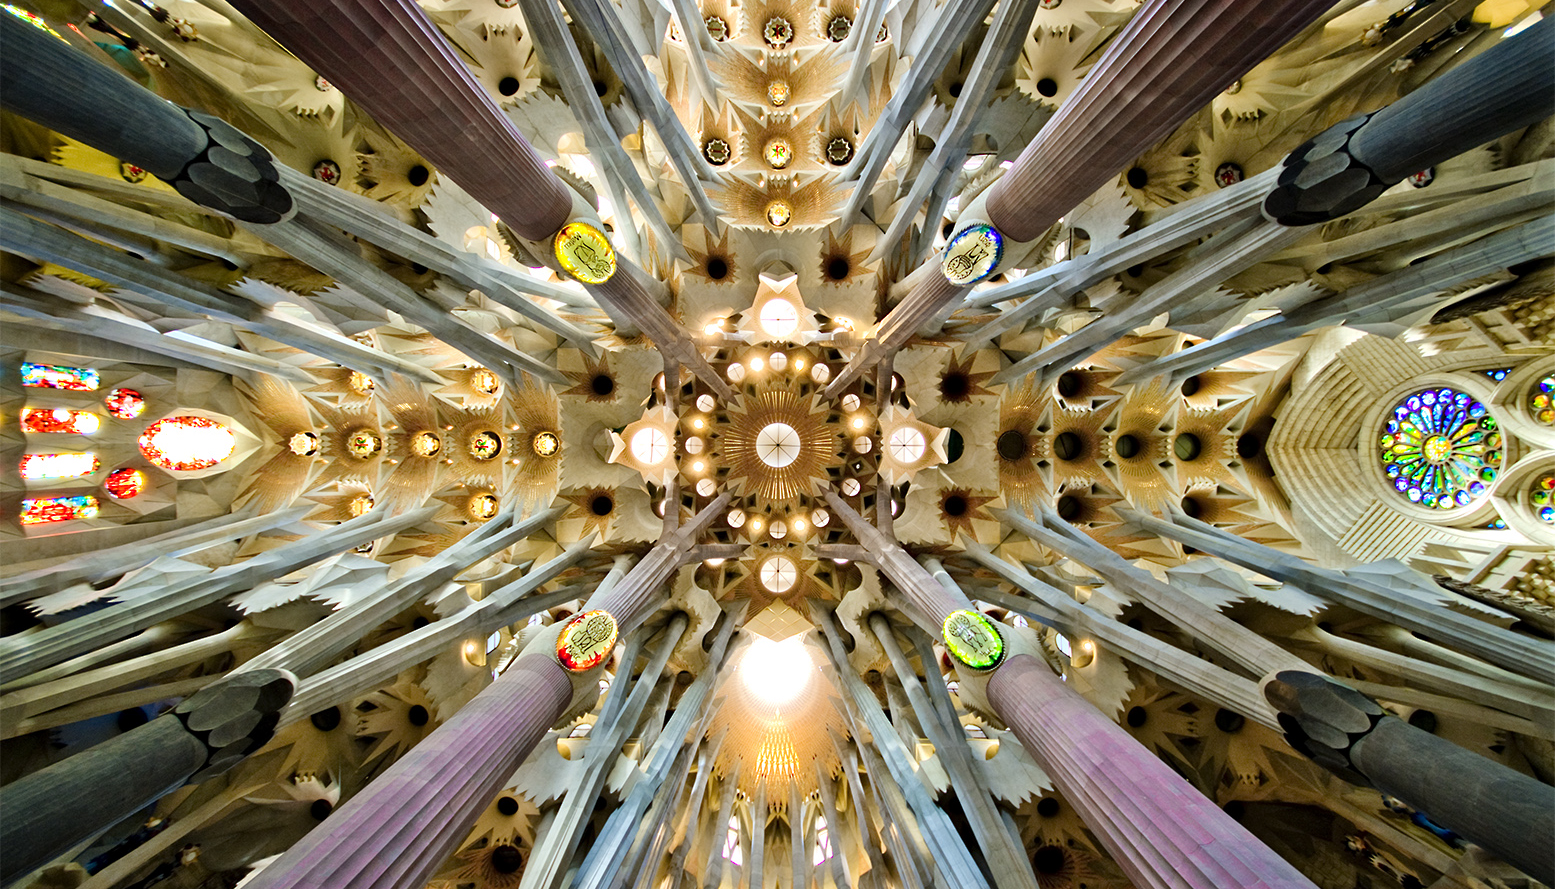 Can Architecture Perform Miracles? The Quest To Make Gaudi A Saint